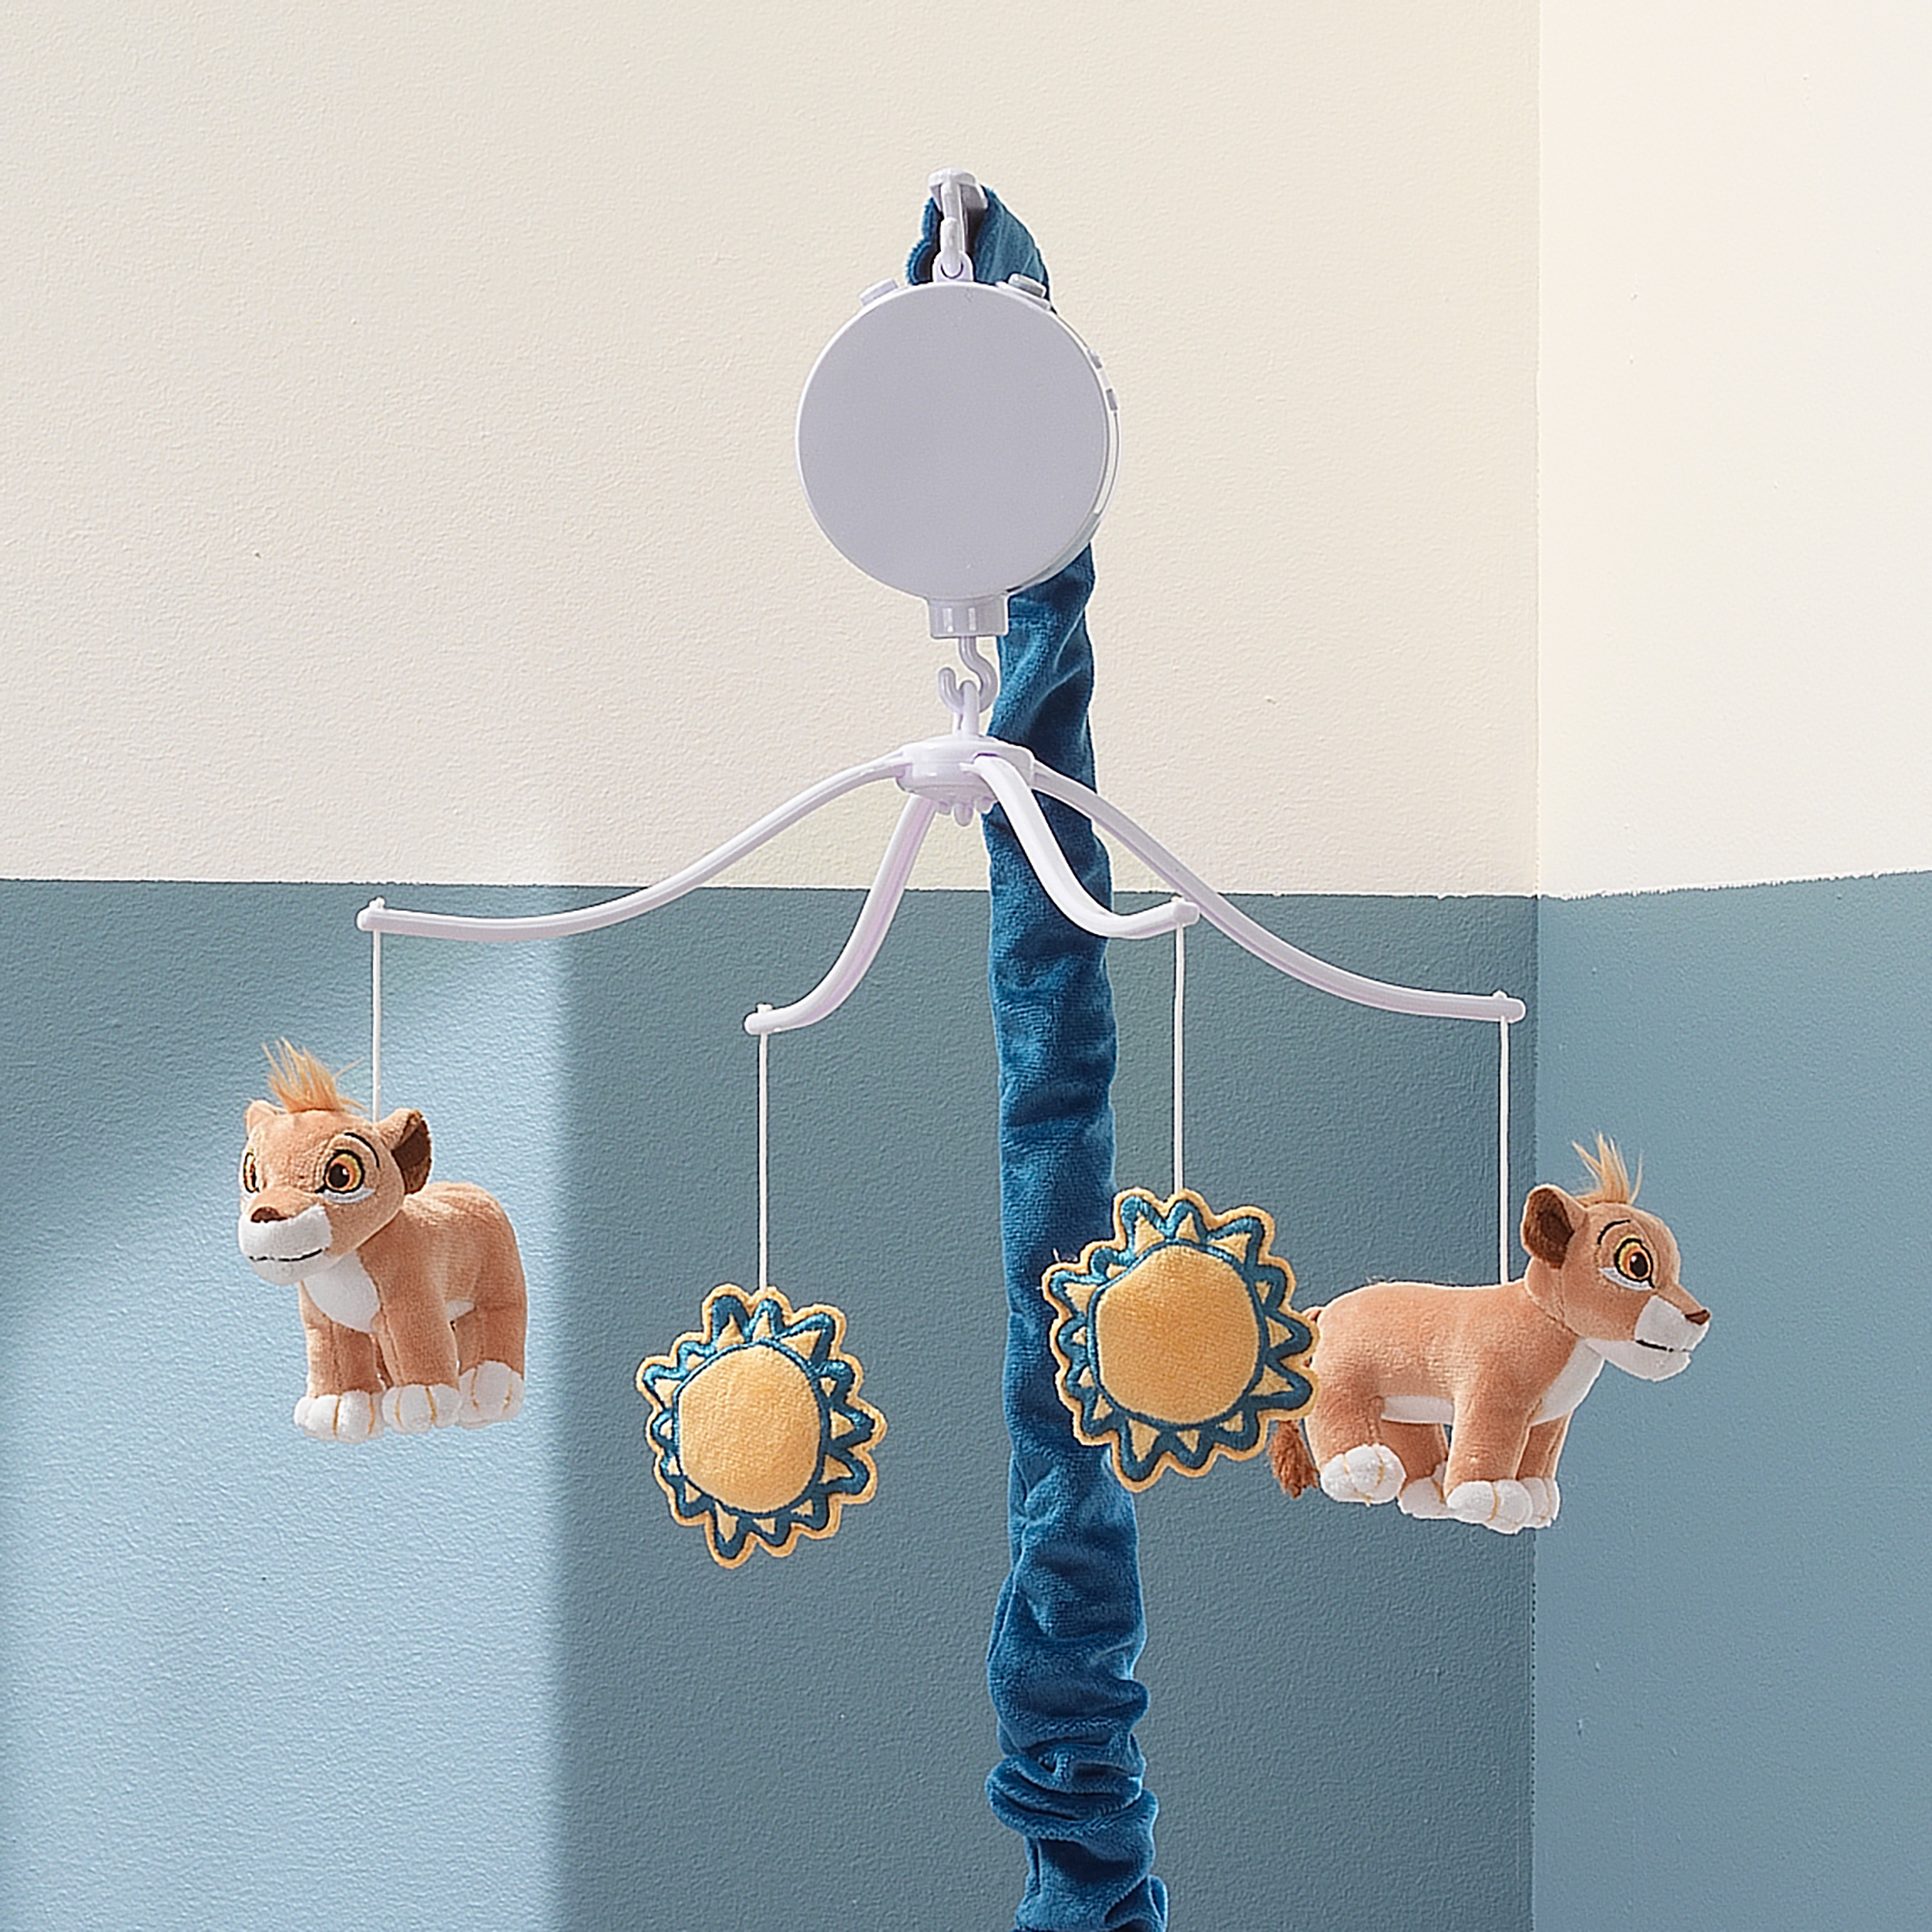 Disney Baby Lion King Adventure Musical Baby Crib Mobile by Lambs & Ivy - Blue - image 3 of 4